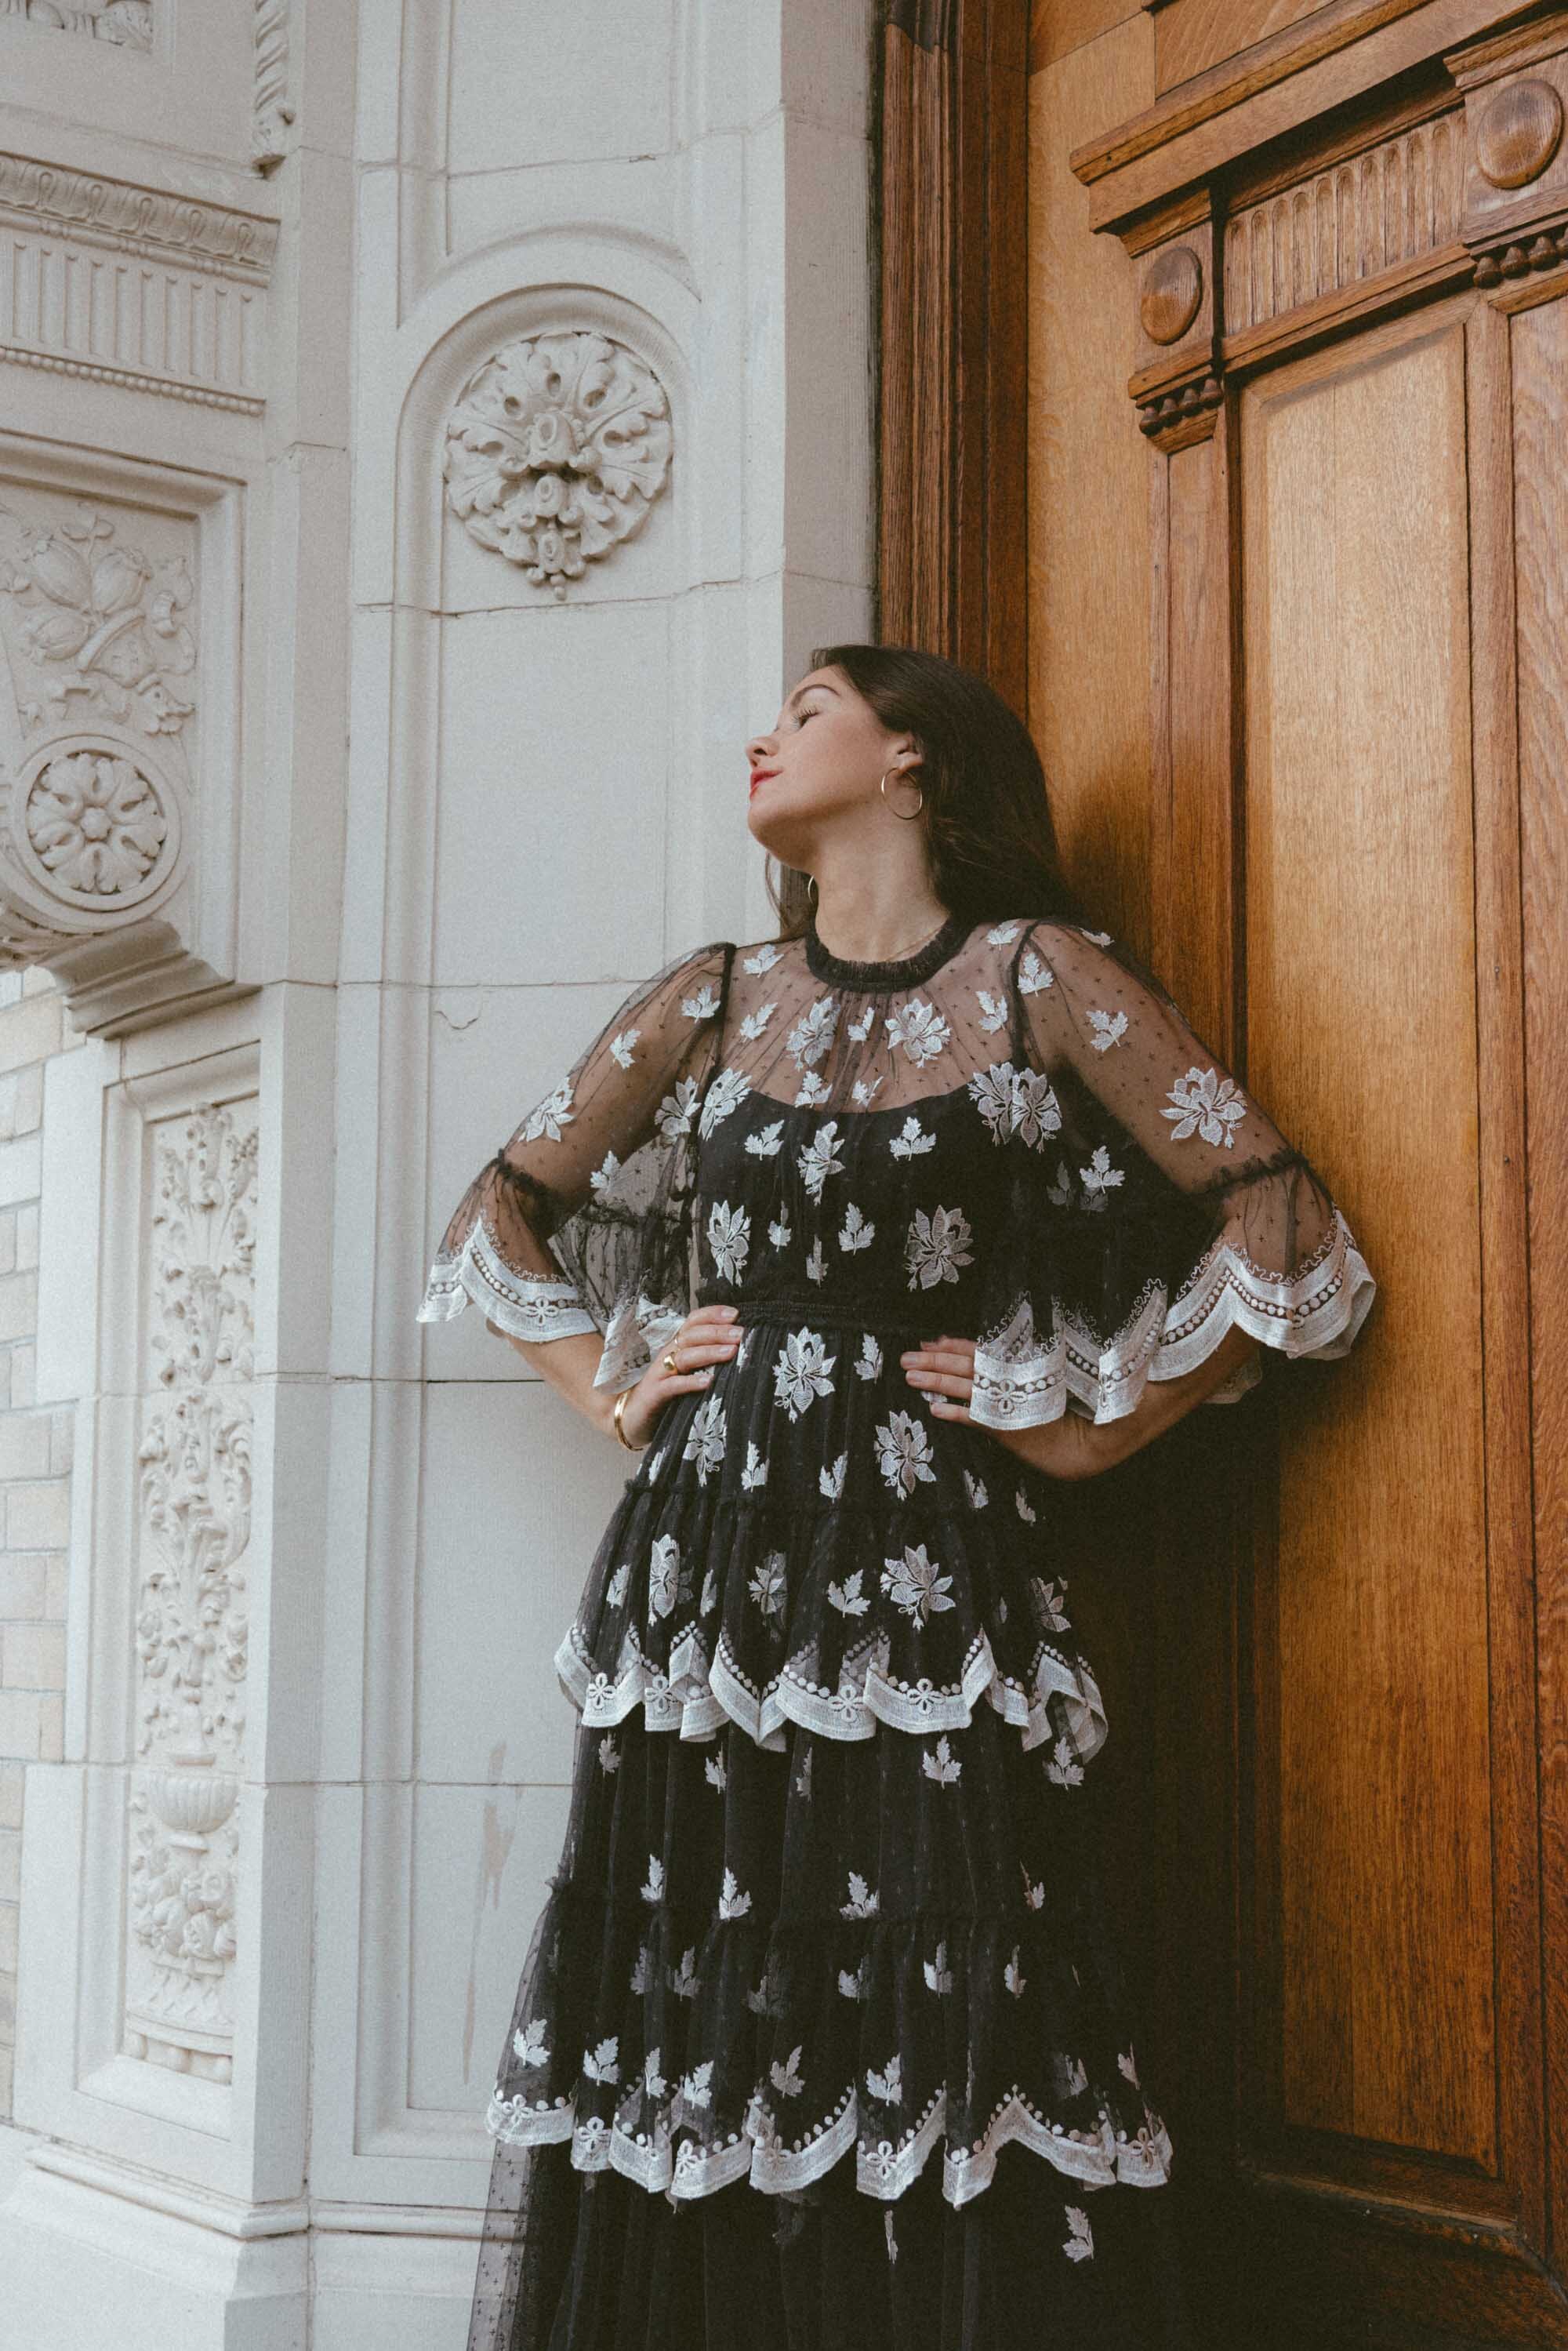 Chic vintage victorian inspired holiday dress. Sarah Butler of @sarahchristine wearing Needle and Thread Amber Petal Gown in Graphite made from sequin-embellished tulle with tiered ruffled trims and a semi-sheer fabrication in Seattle, Washington -8.jpg